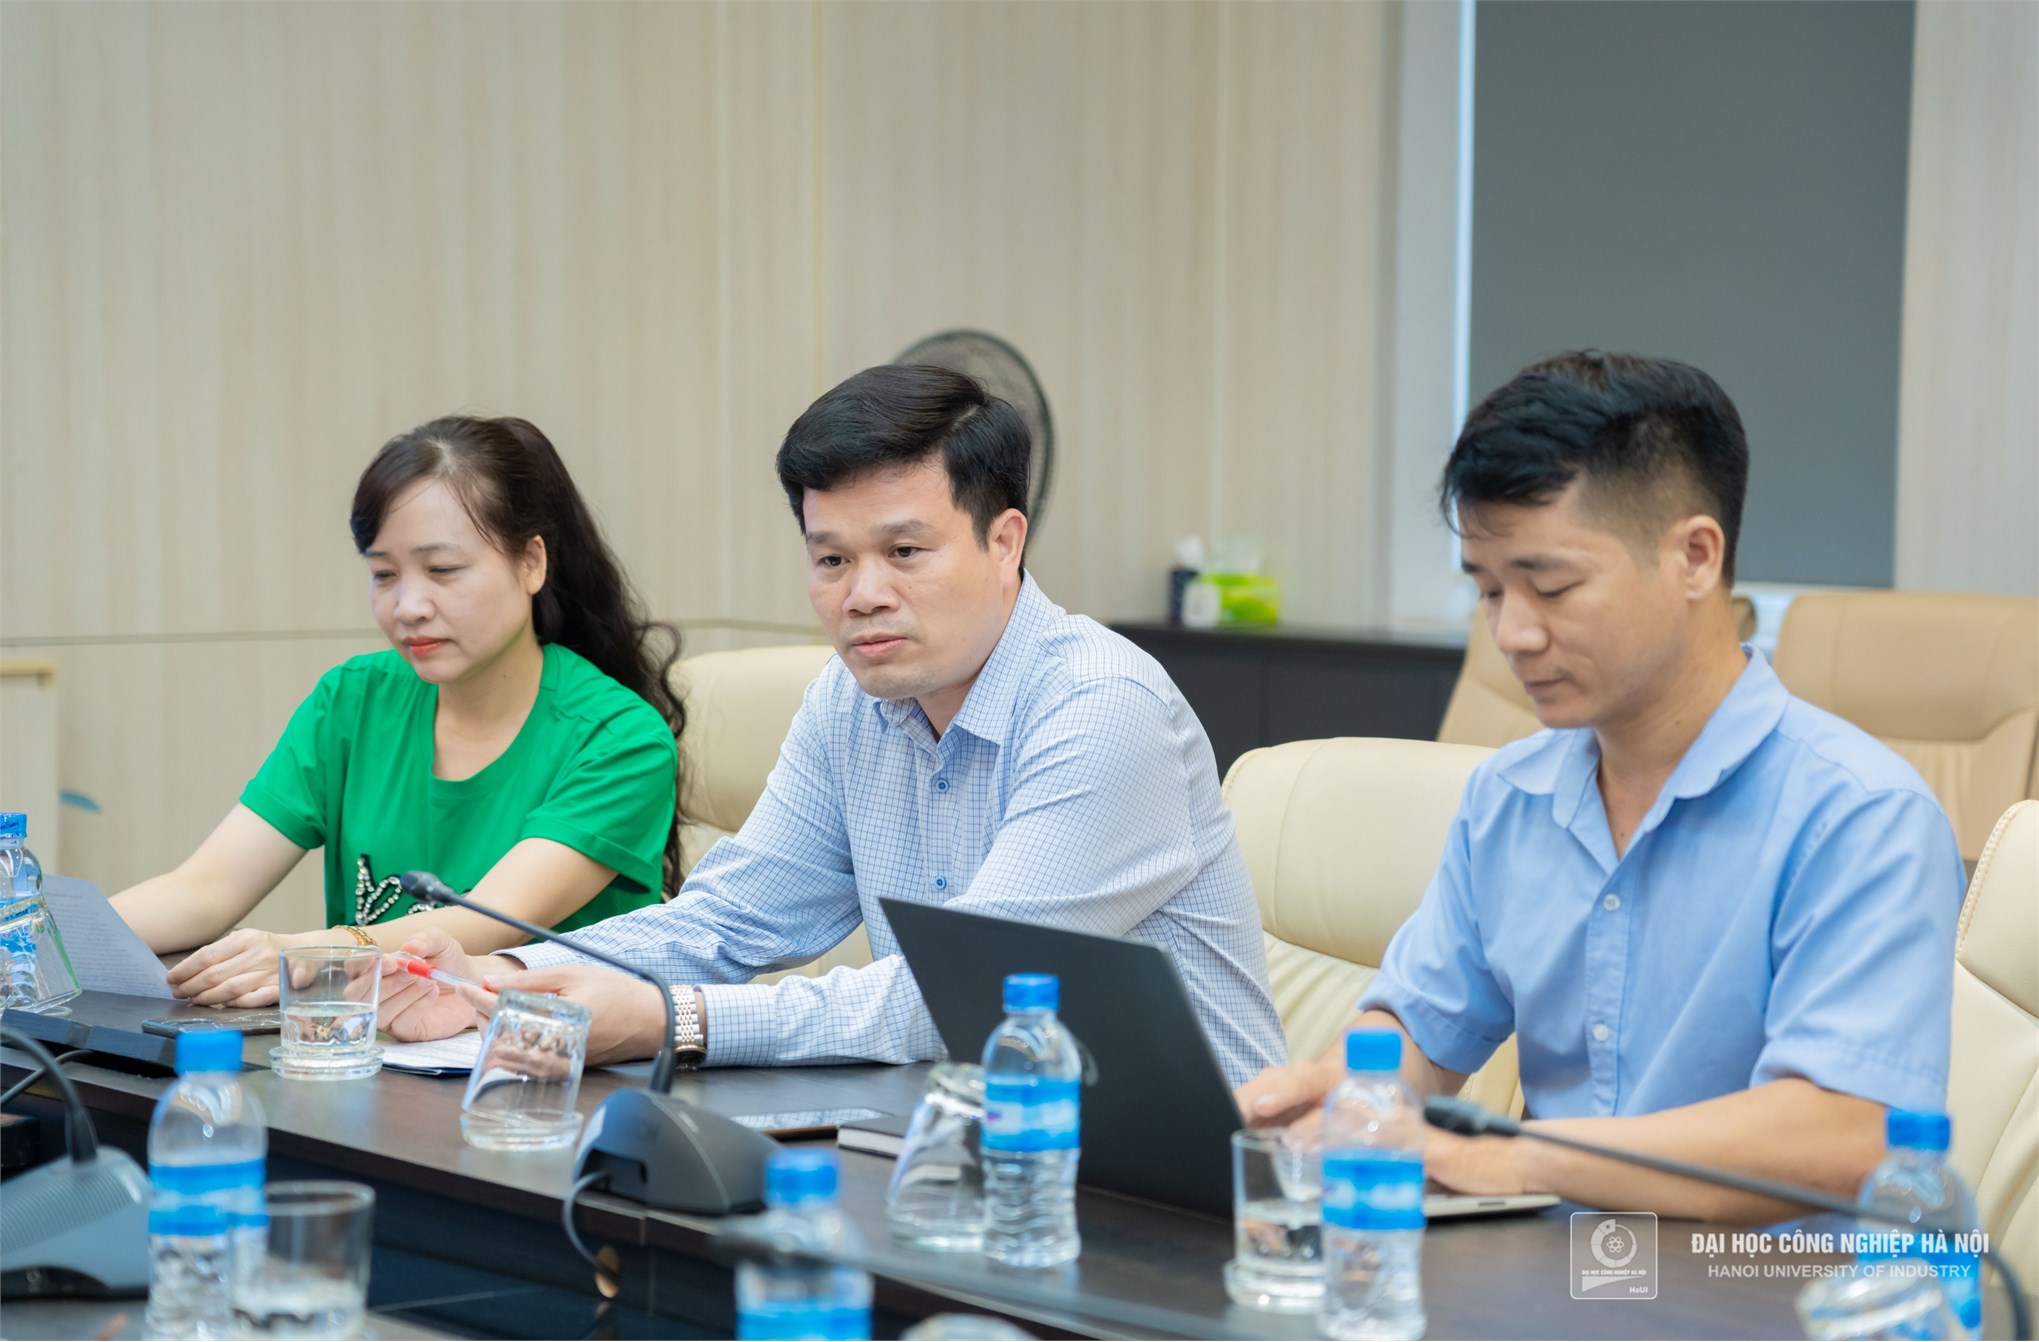 University-Enterprise cooperation in training high-quality human resources